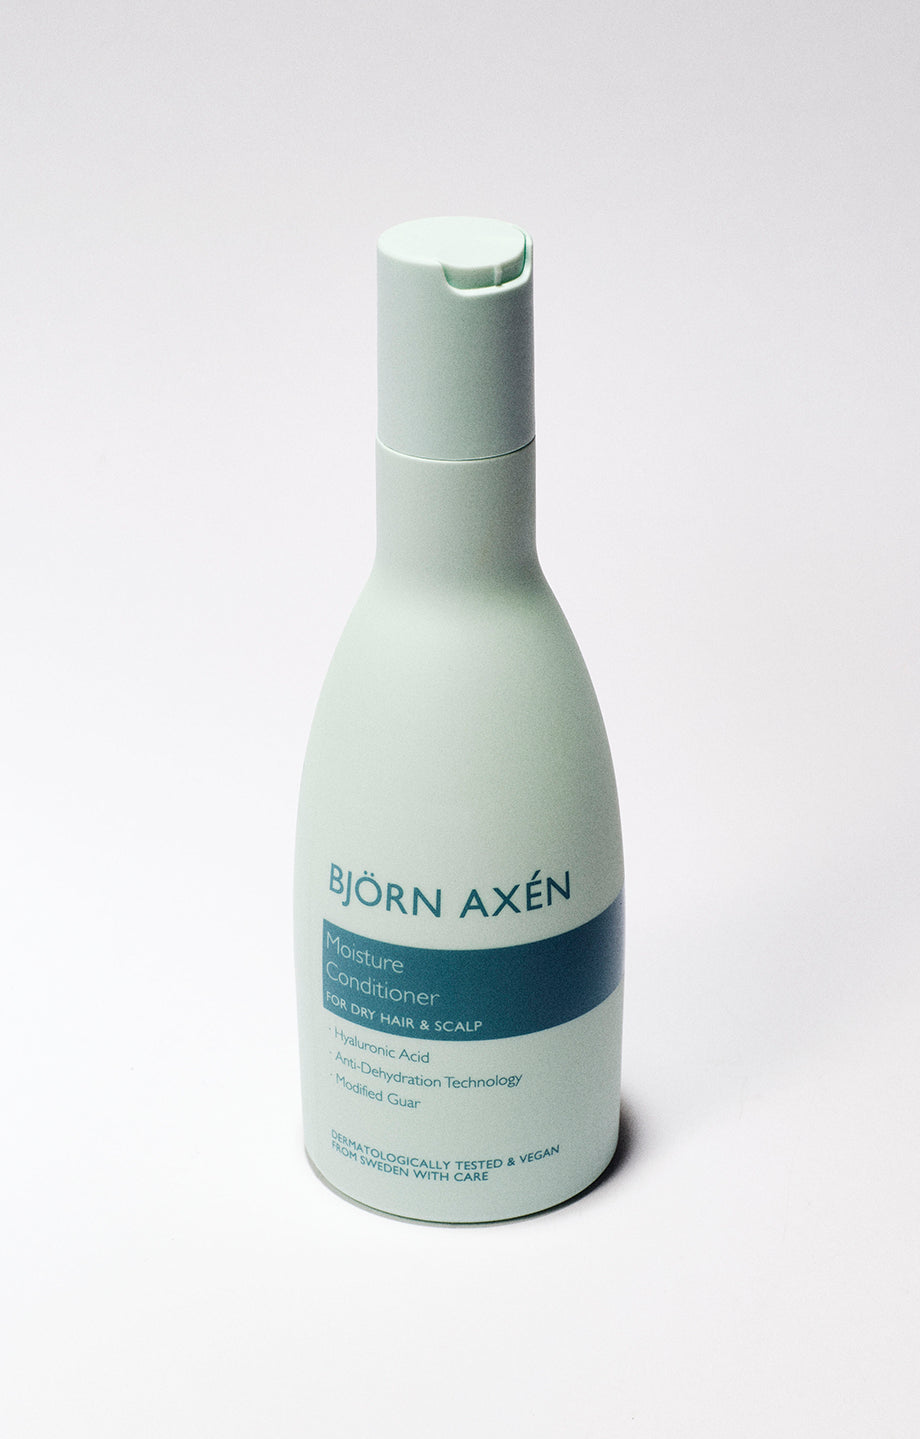 Moisturizing conditioner to soften and nourish dry hair and scalp